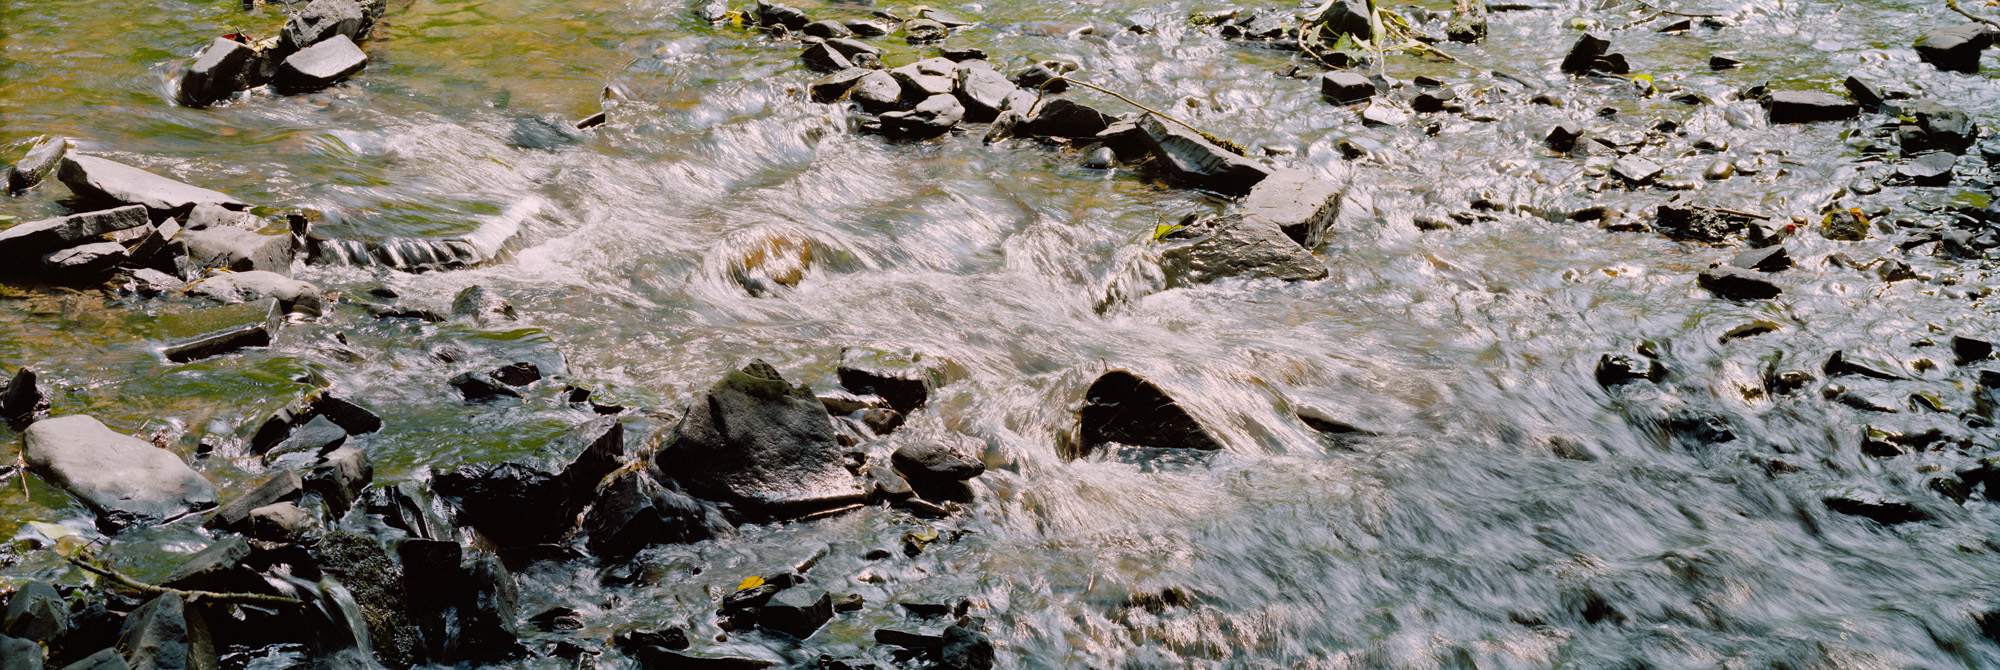 landscape, nature, analogue photography, large format, panorama photography, Markus Bollen, 6x17, green, life, growth, peace, quiet, grass, meadow, photography, photography, large format photography, large format photography, Bergisches Land, Bergisch Gladbach, Altenberg, Eifgenbach, Odenthal, rocks, water, river, stream, long exposure, long exposure, moss, ivy, 